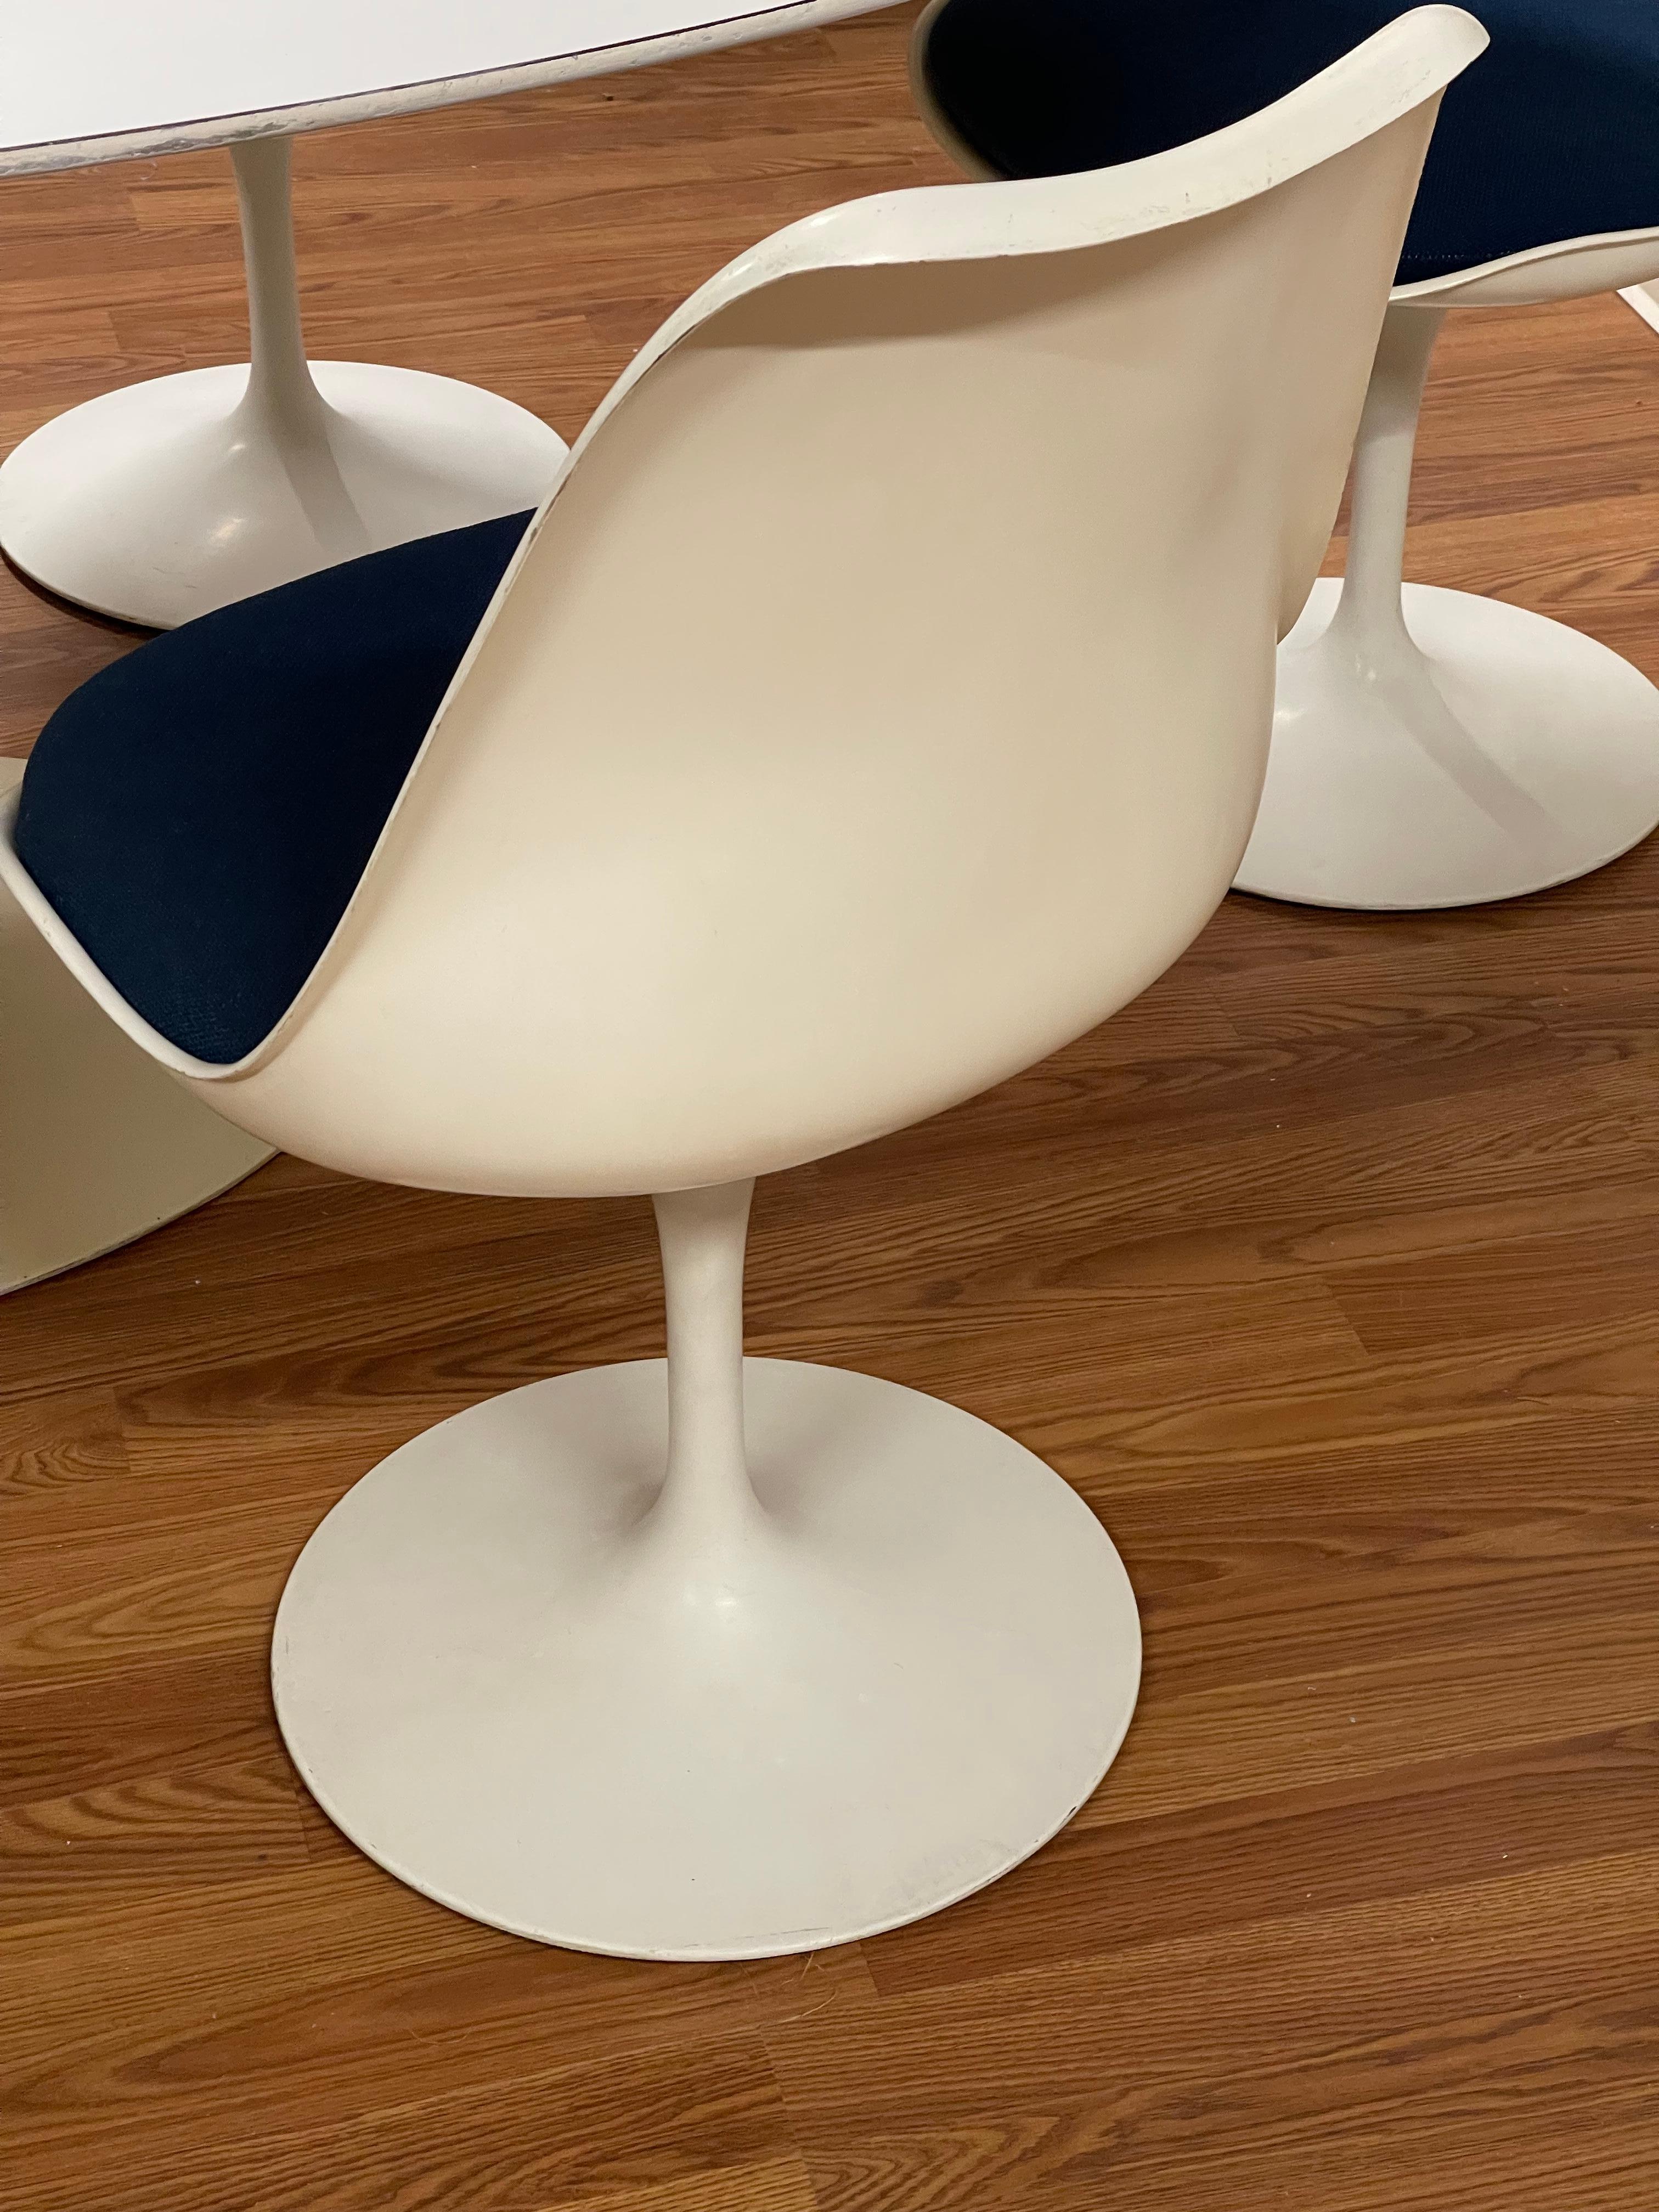 1950’s Saarinen Oval Tulip Table and Chairs 4